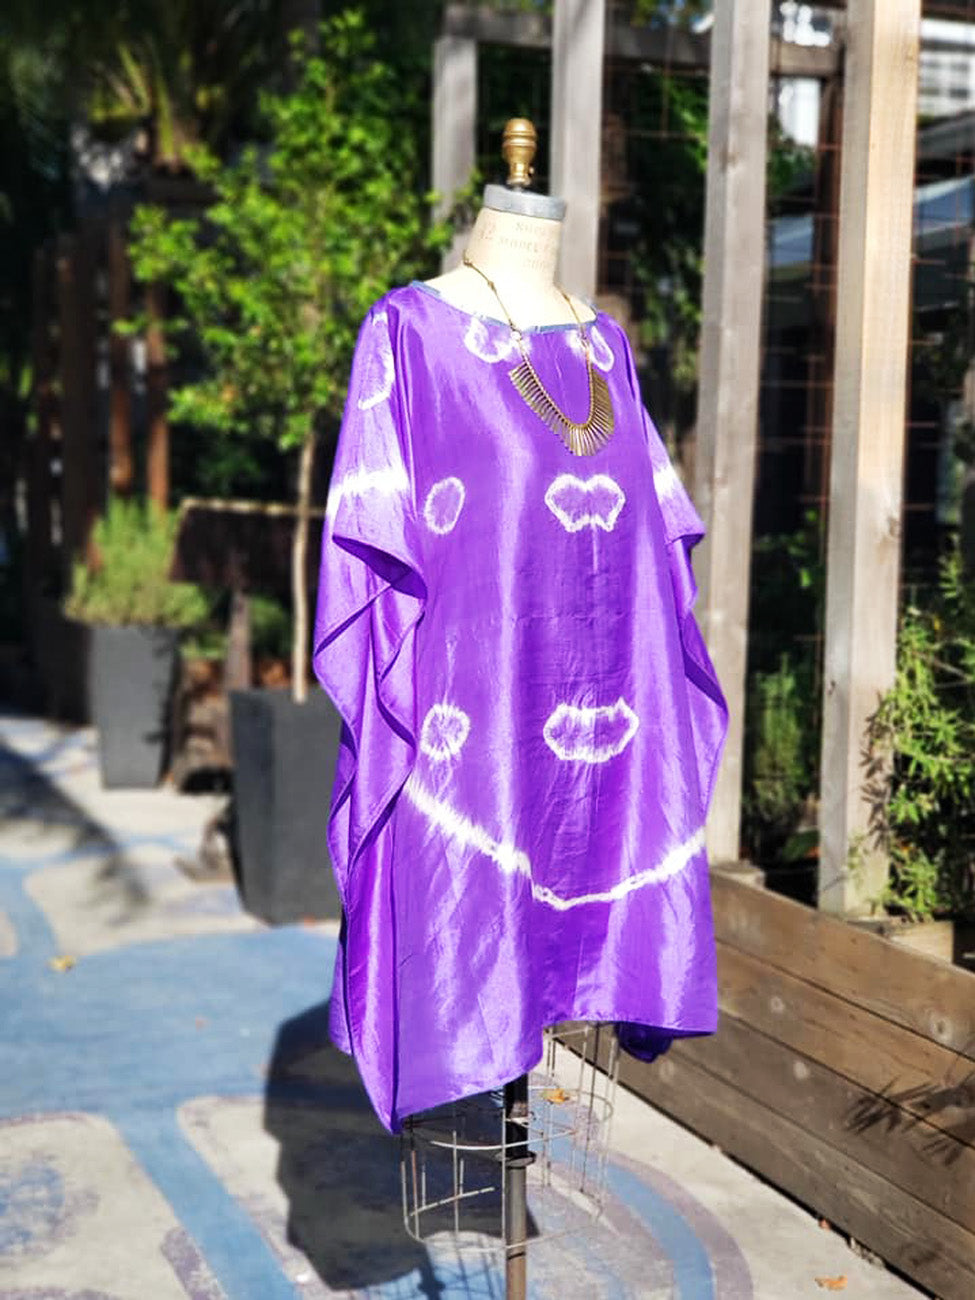 Silk Caftan Almost Famous Collection - The Color Purple